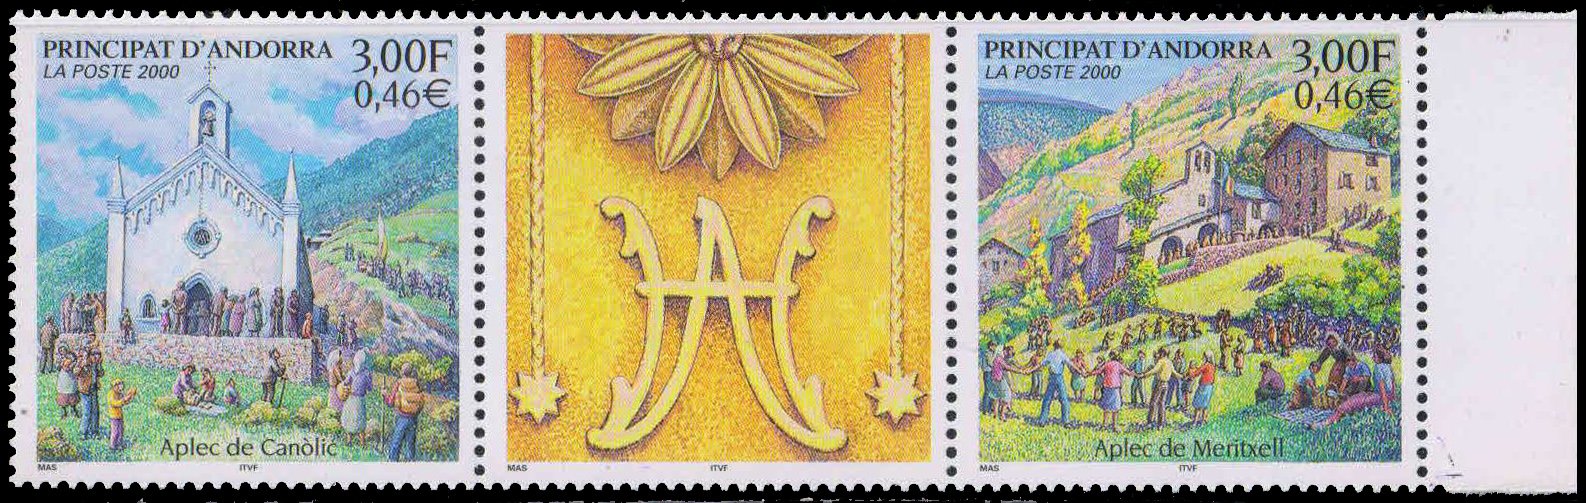 ANDORRA (French) 2000-Church (Canolich Festival) Our lady Chapel (Meritxell Festival), Set of 2 Stamps, MNH, S.G. F569-70-Cat � 5.50